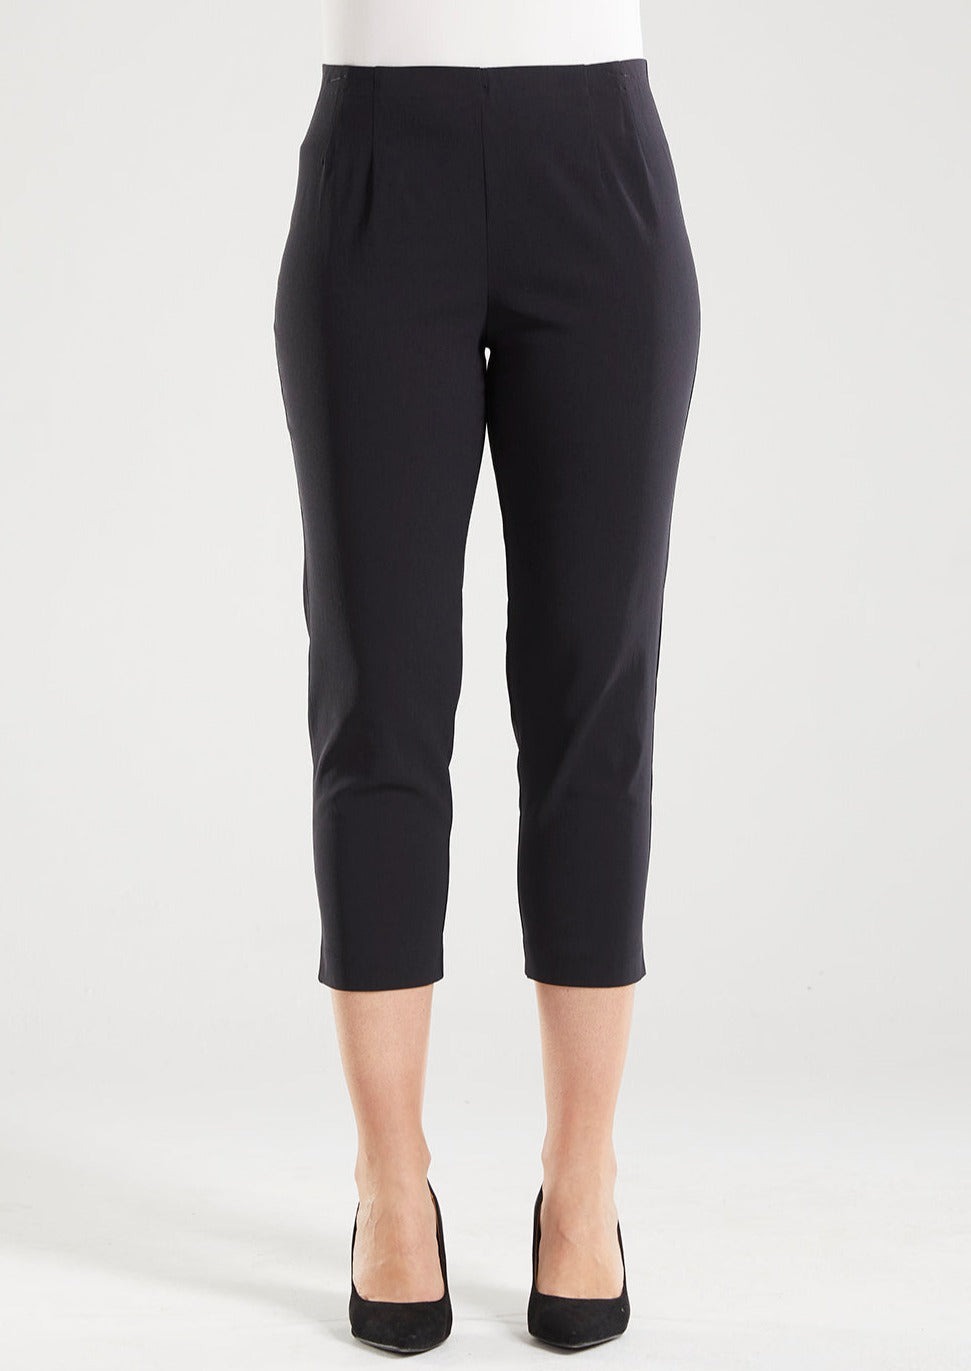 Adora is a Spring Summer 3/4 cropped black pant. Cut at calf length, with an easy comfortable pull on elastic waist and slim legs. Image is front  view of model. Philosophy Australia bengaline 3/4 length pant.